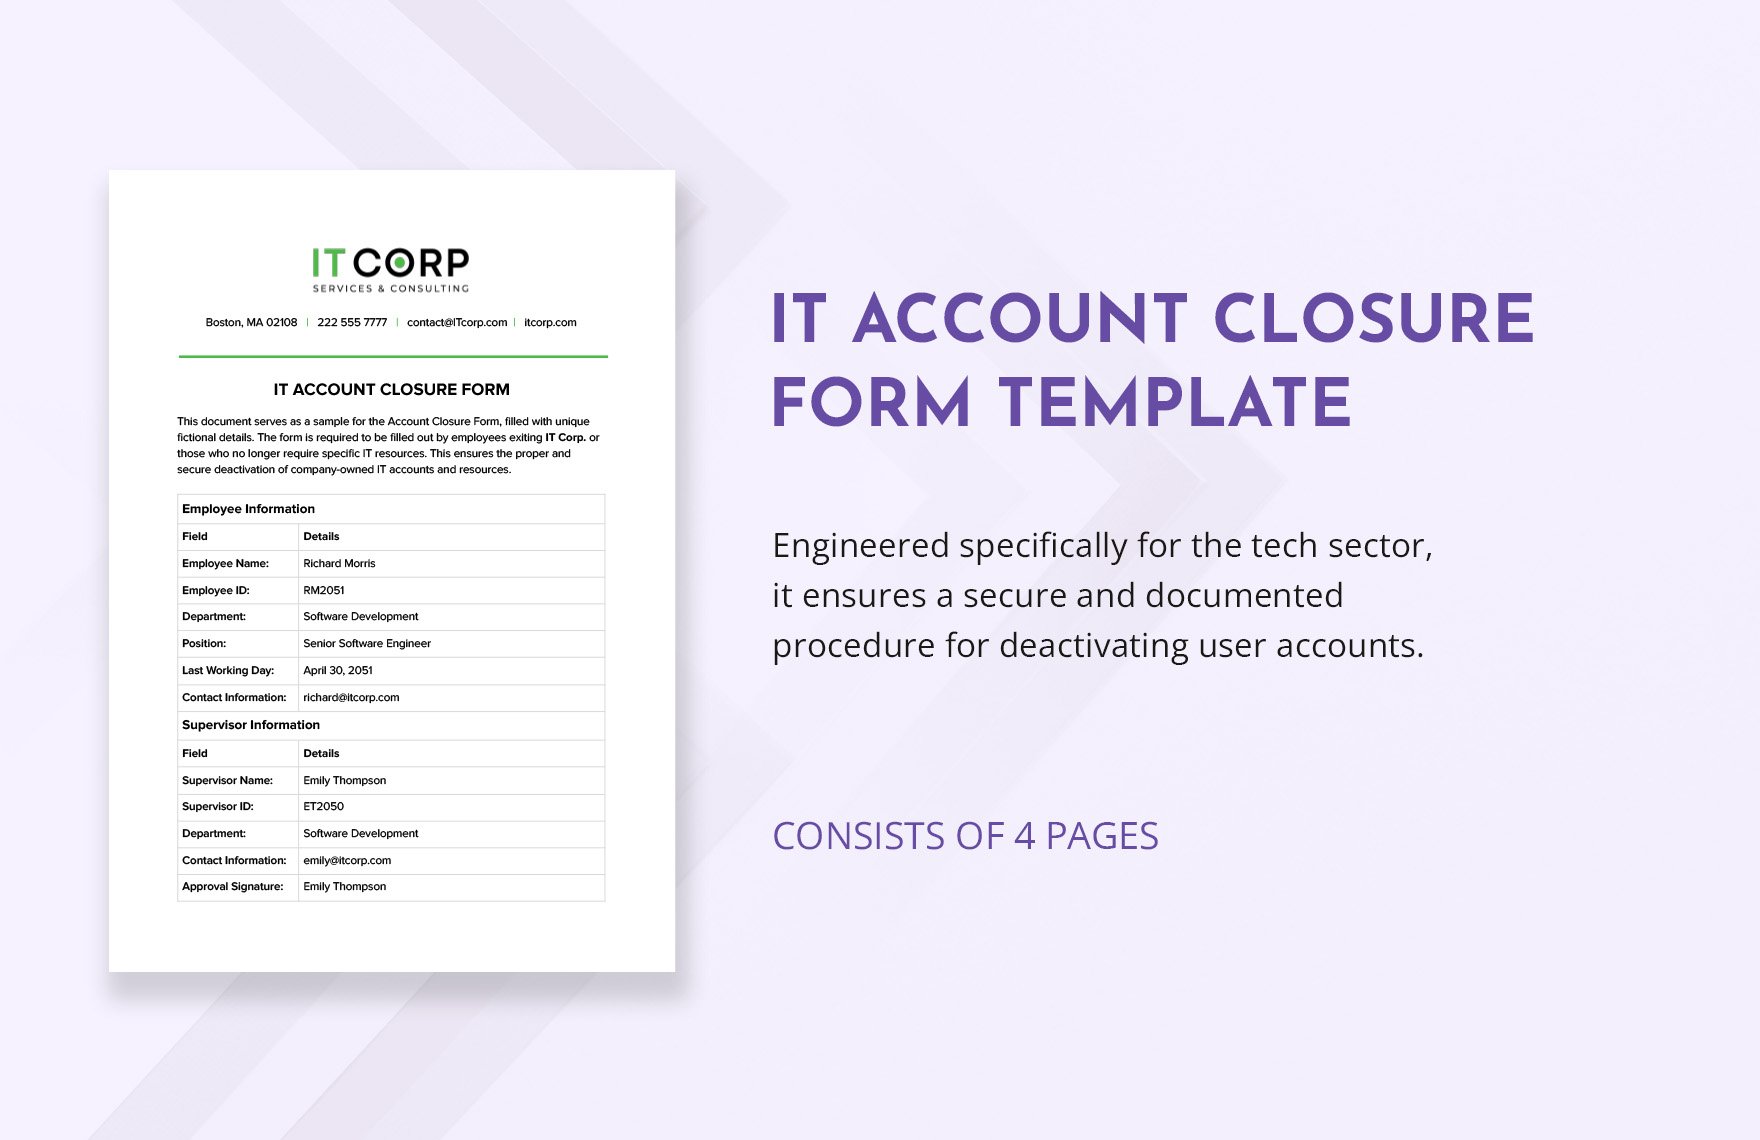 IT Account Closure Form Template